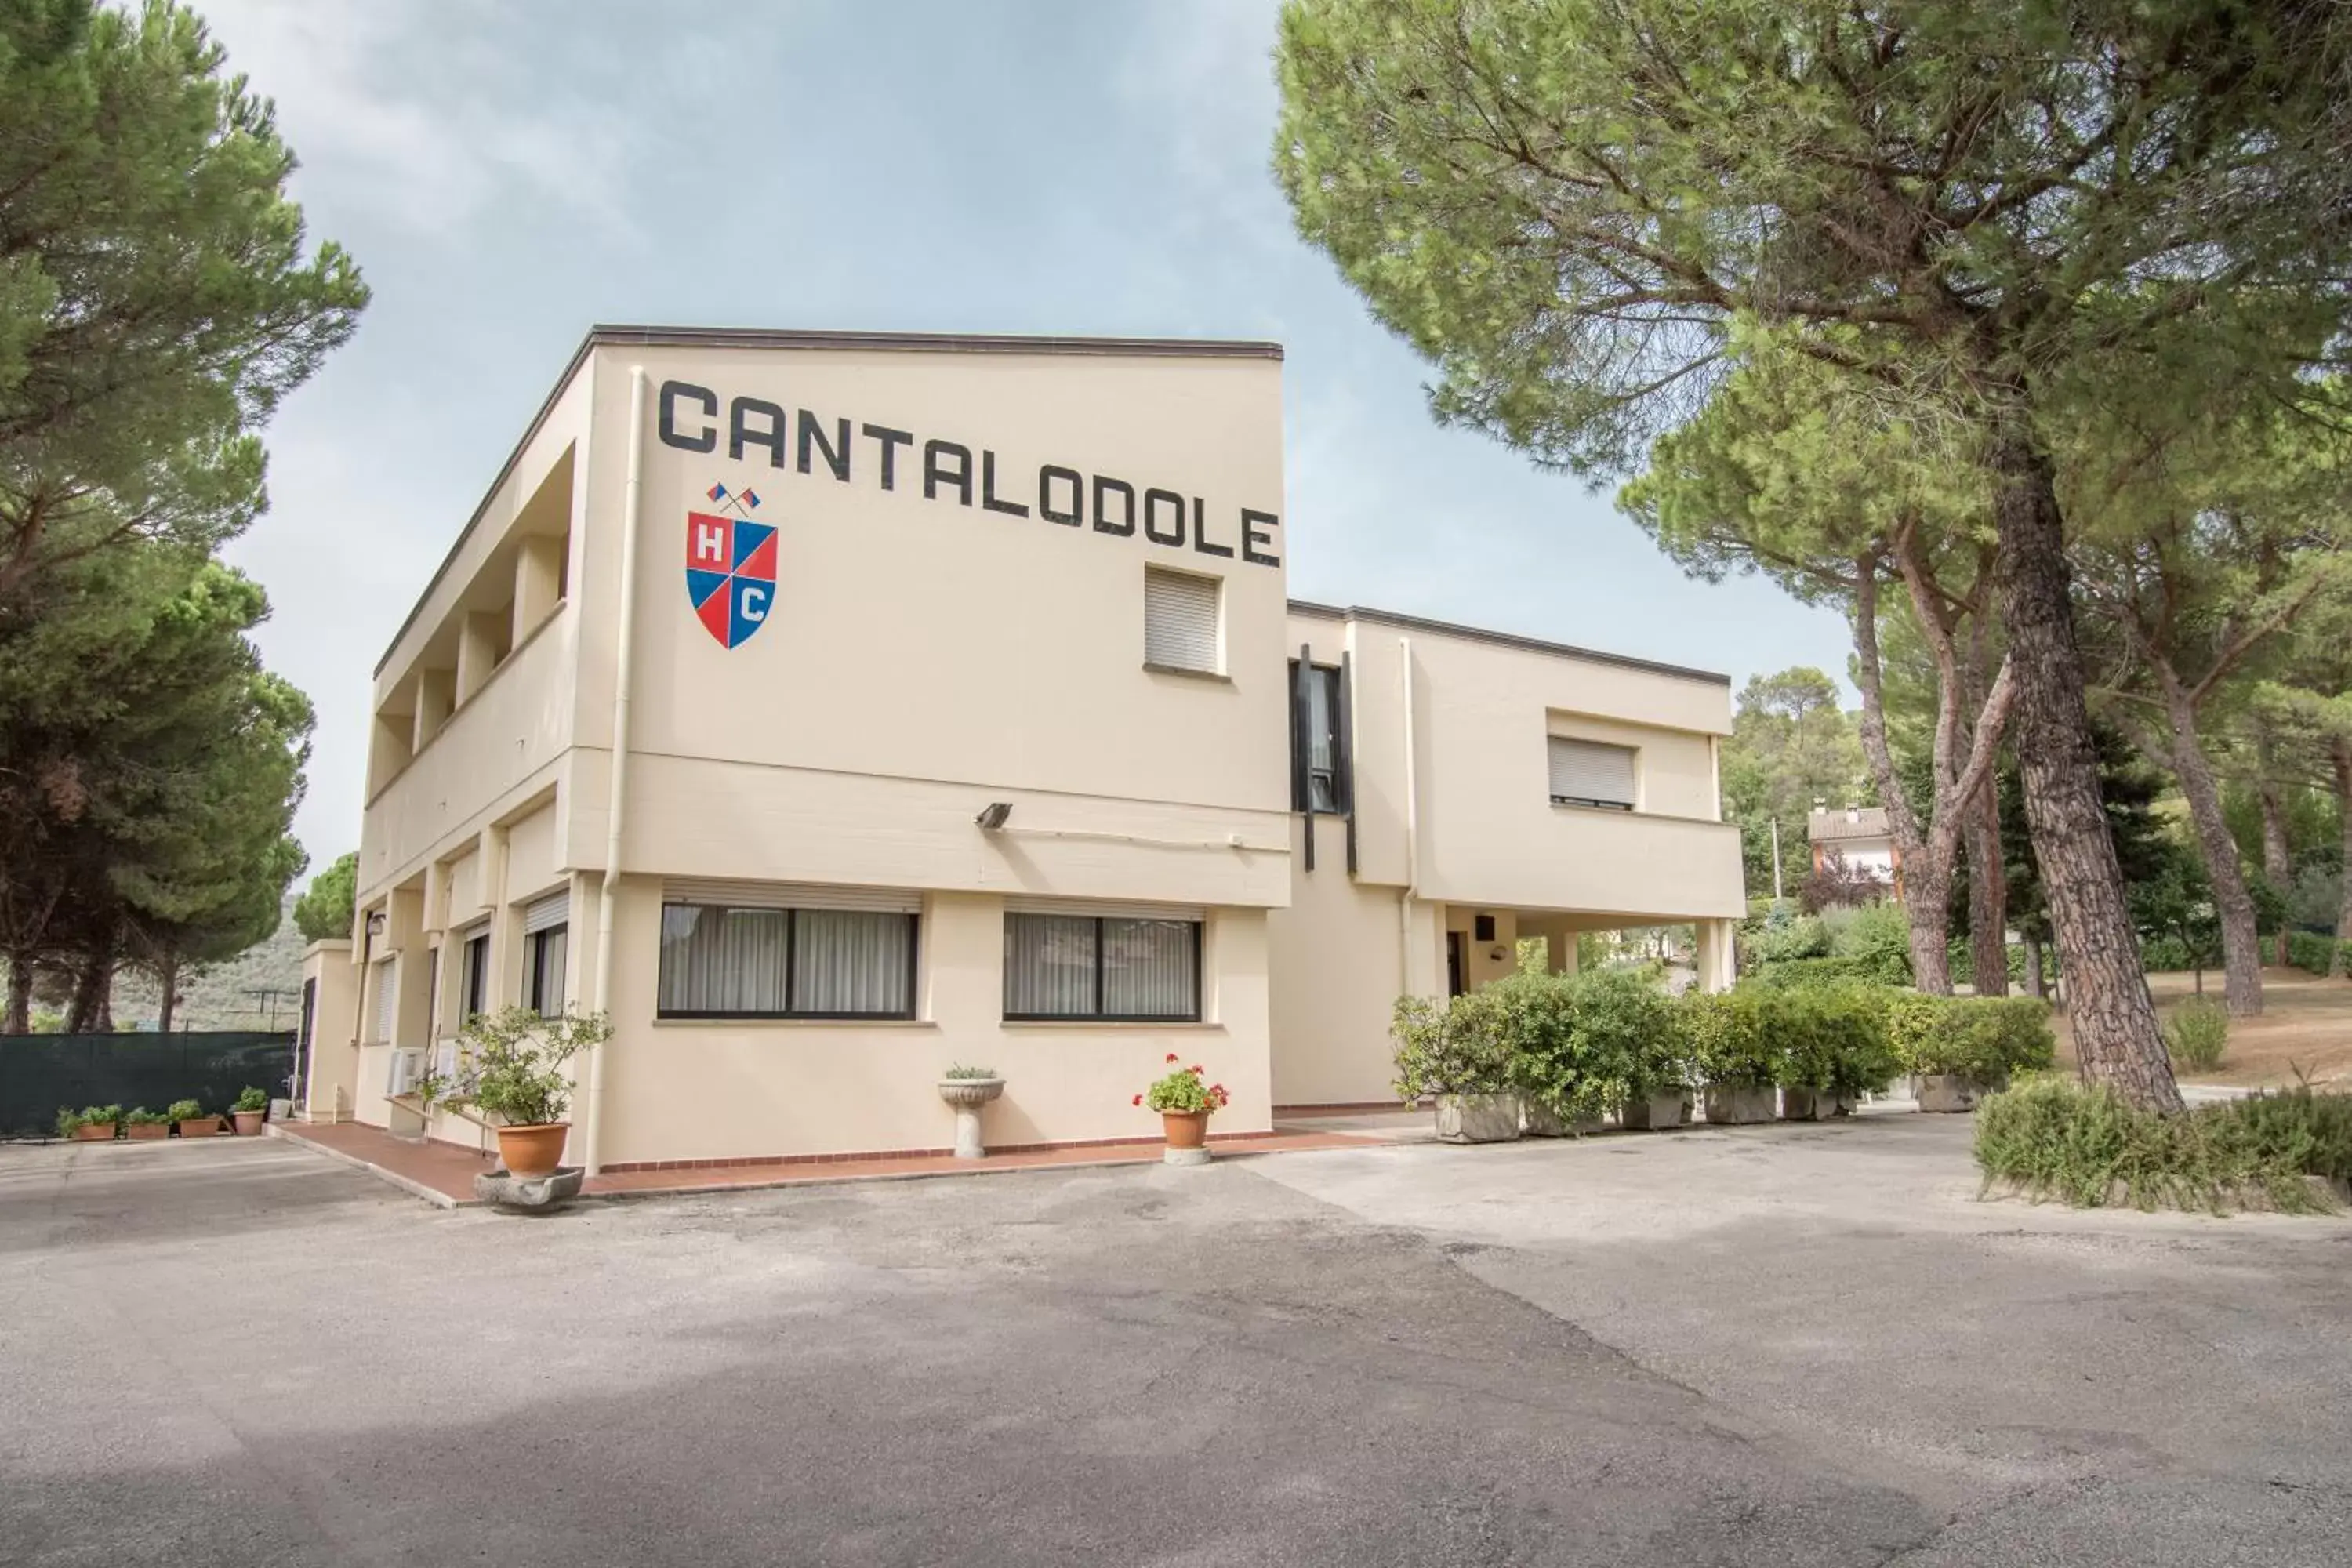 Property Building in Hotel Cantalodole